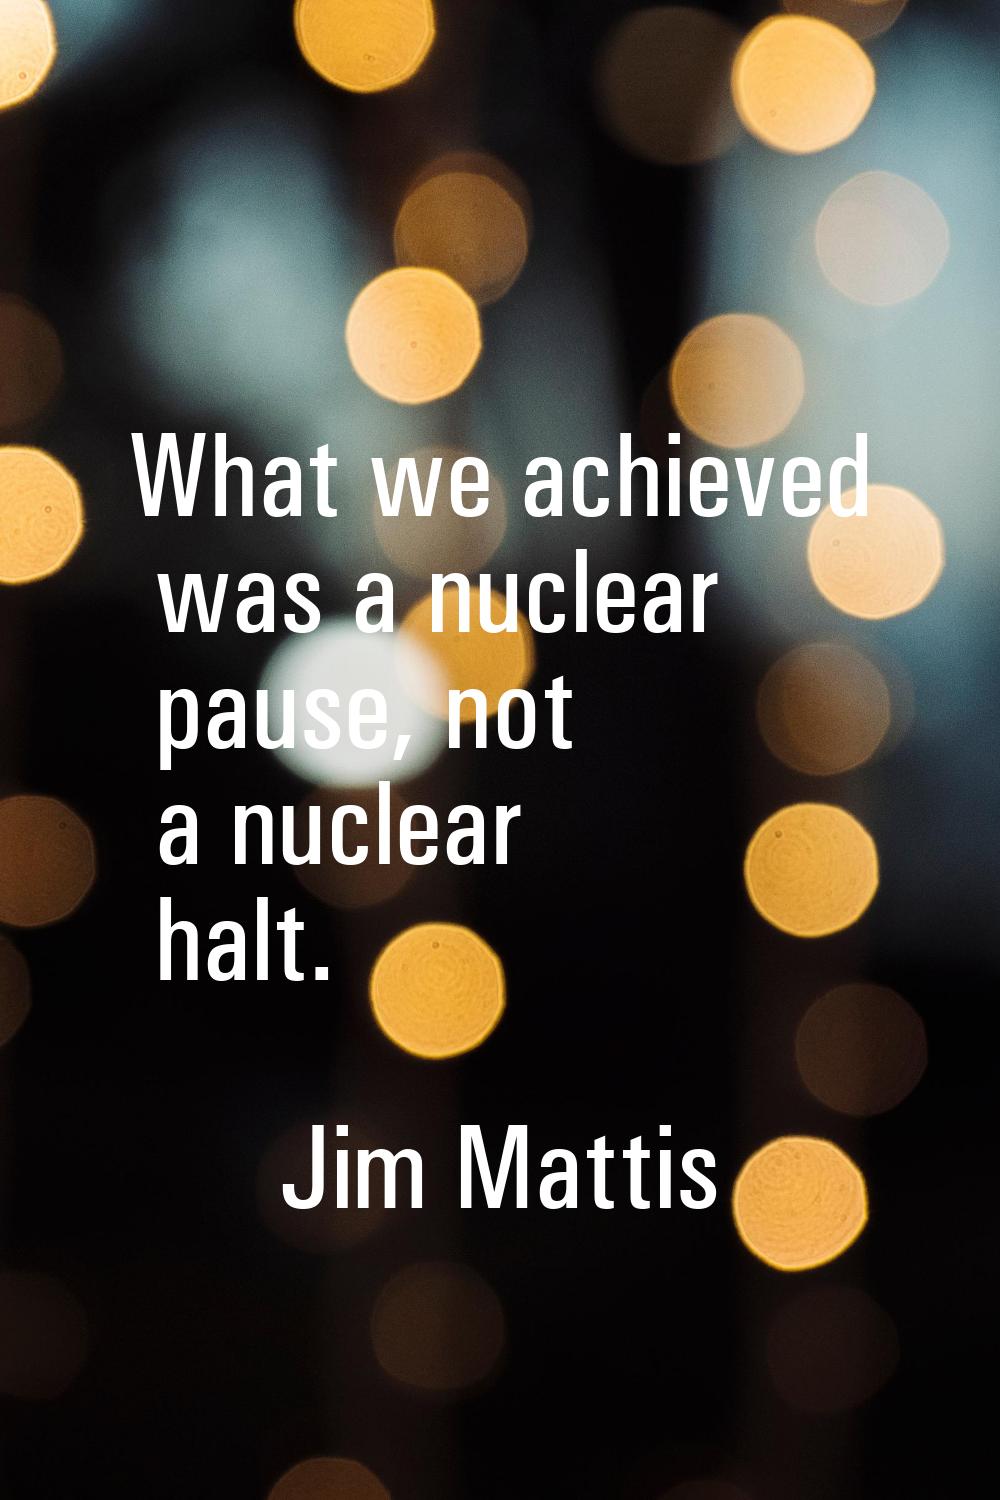 What we achieved was a nuclear pause, not a nuclear halt.